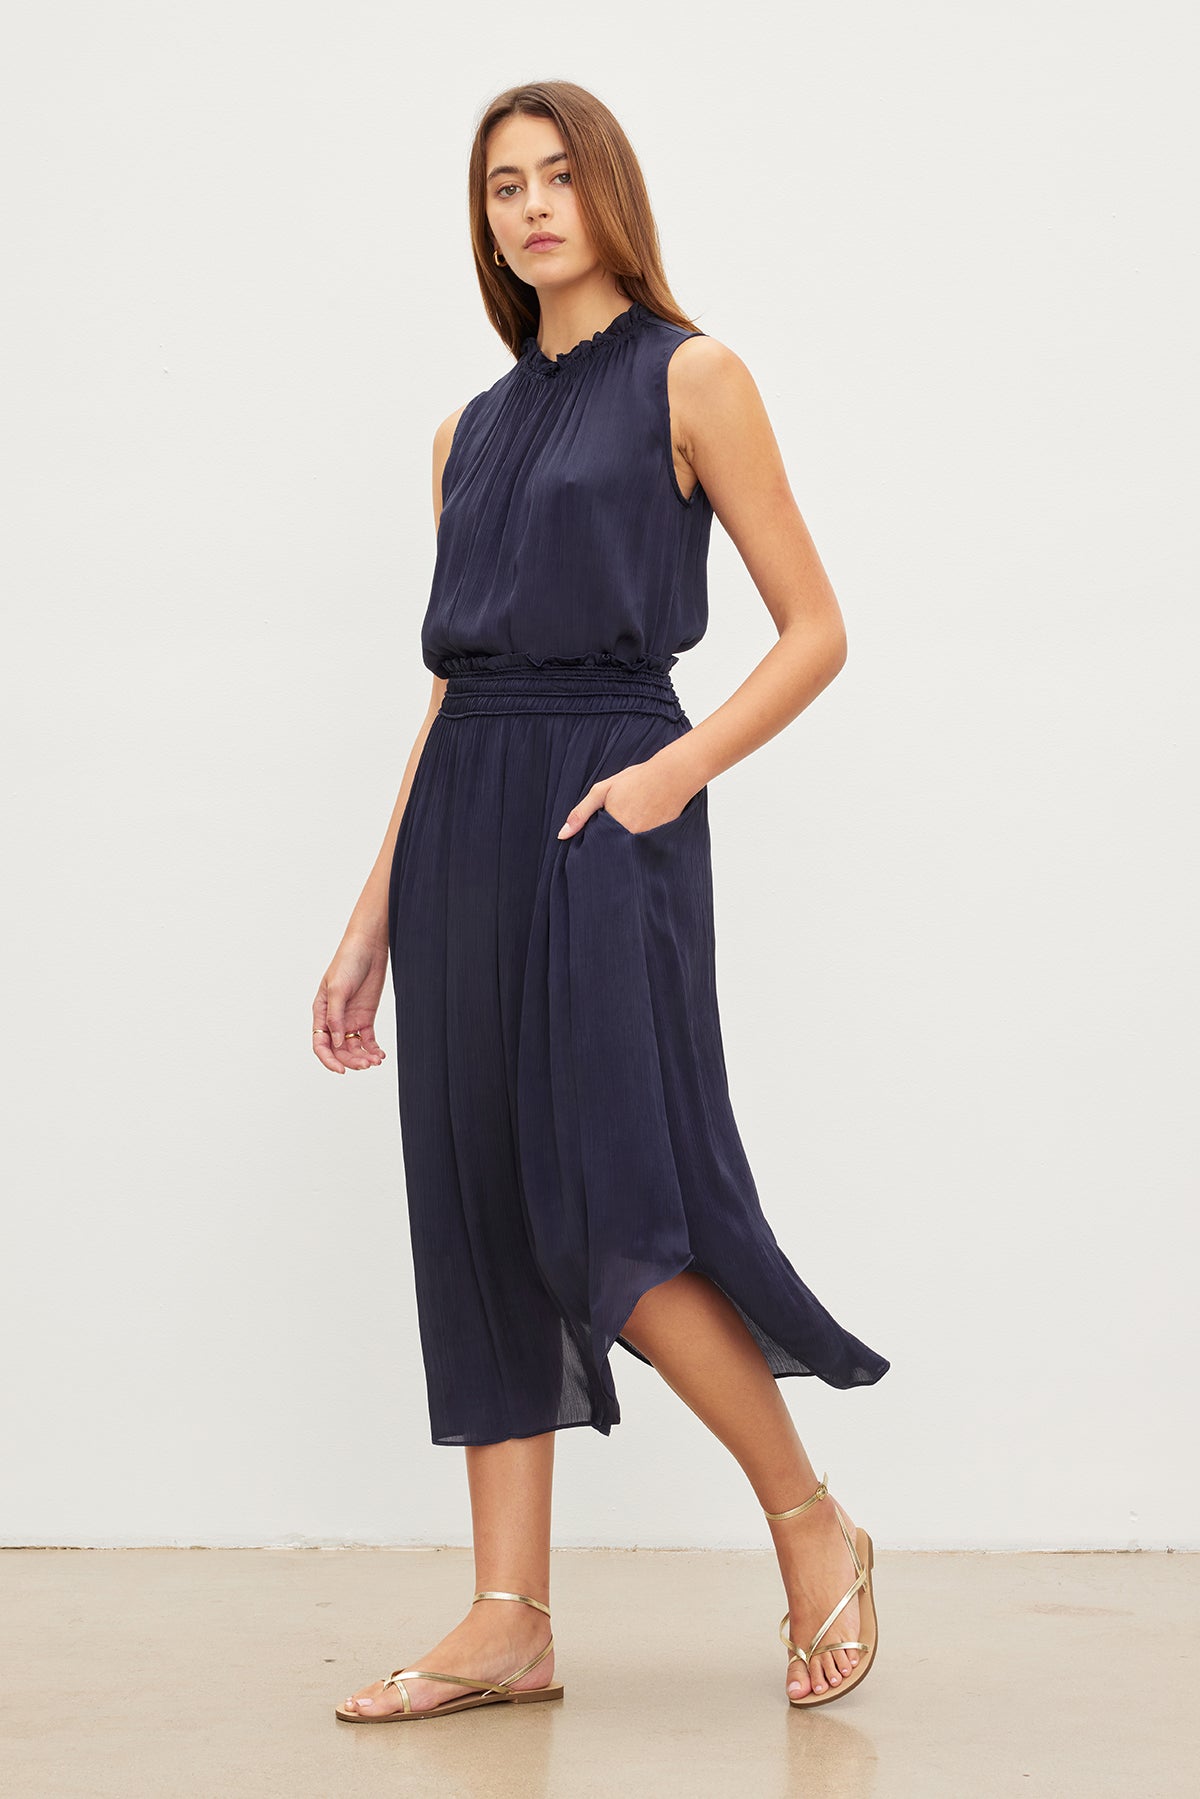 A woman in a navy blue sleeveless dress with an elastic Velvet by Graham & Spencer DIMI smocked skirt waist and gold sandals stands against a plain white background.-36409580028097